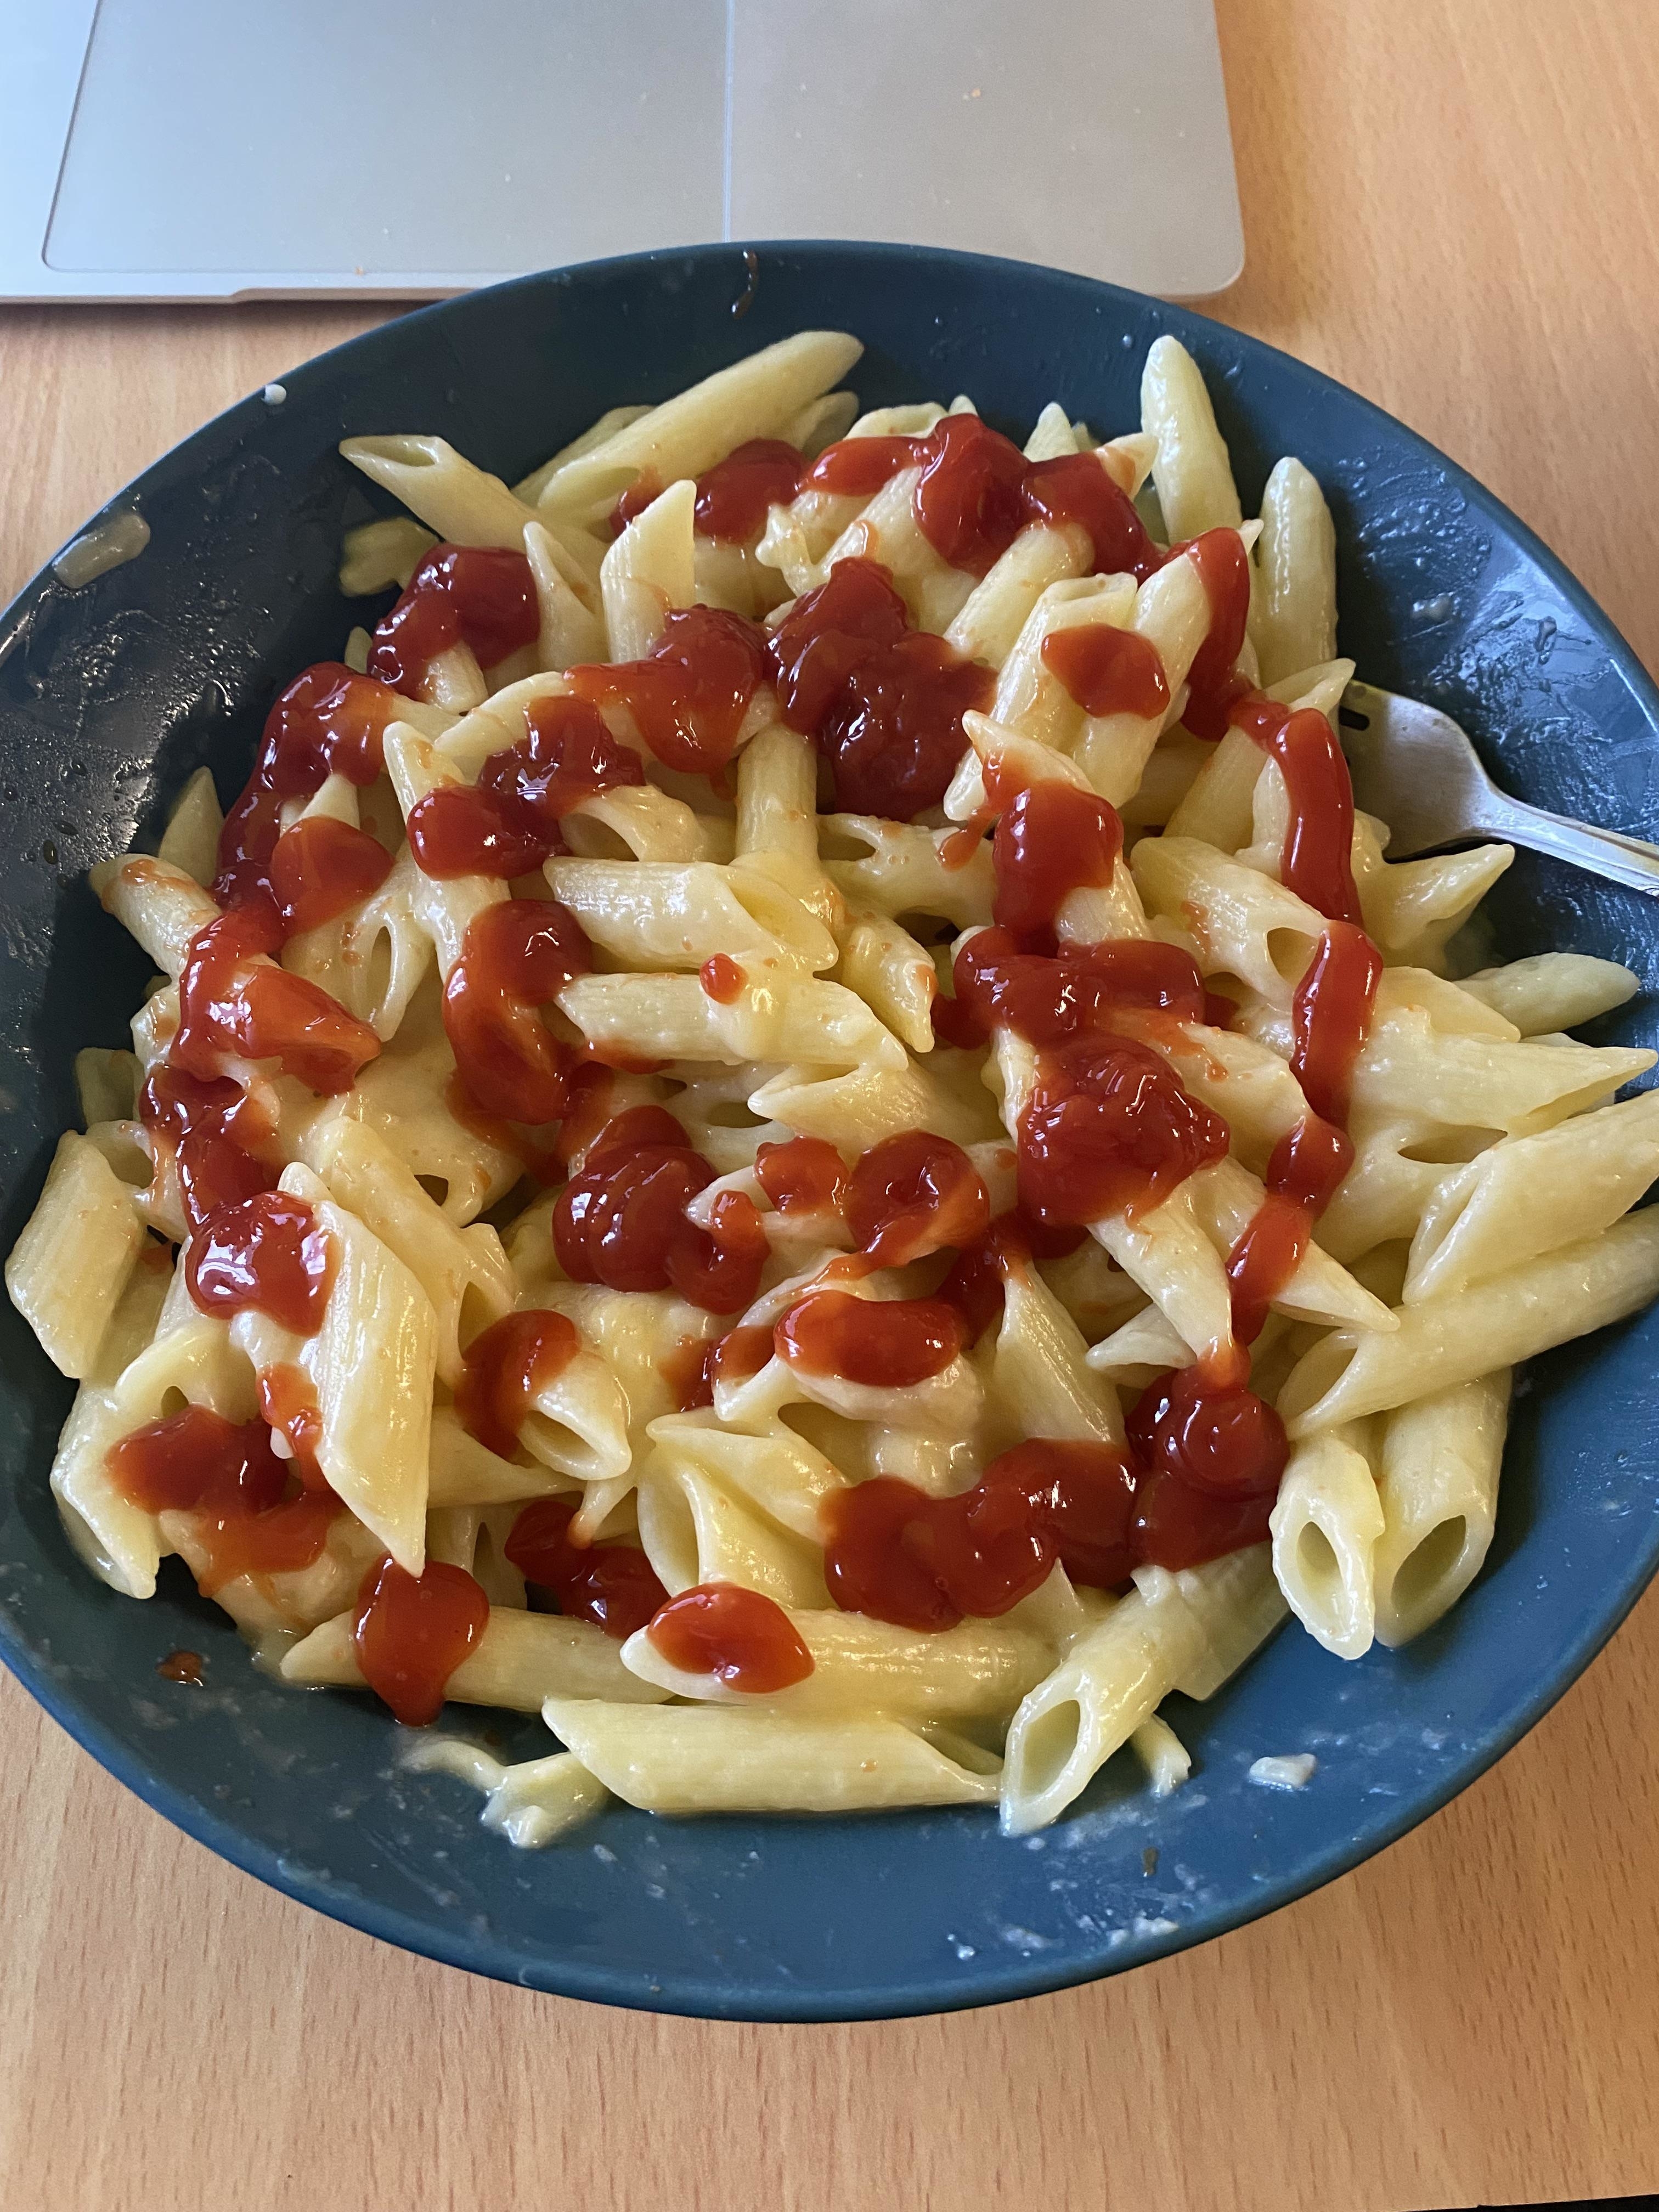 A plate of penne pasta with dollops of ketchup on a wooden table, next to a laptop